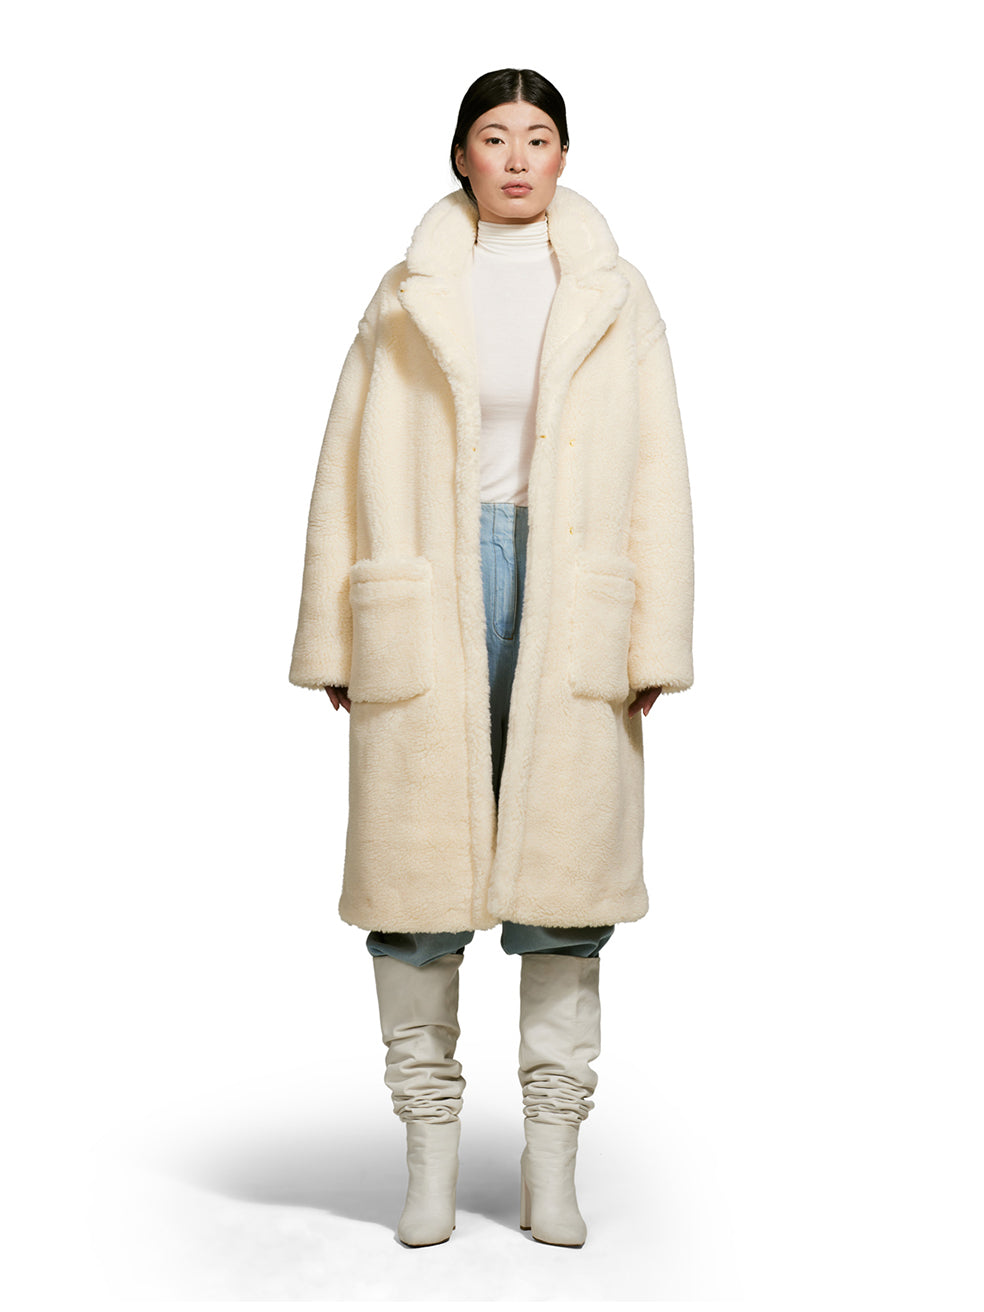 Model wearing a teddy-inspired faux-fur sherpa shell in cream color on a white background from the front.